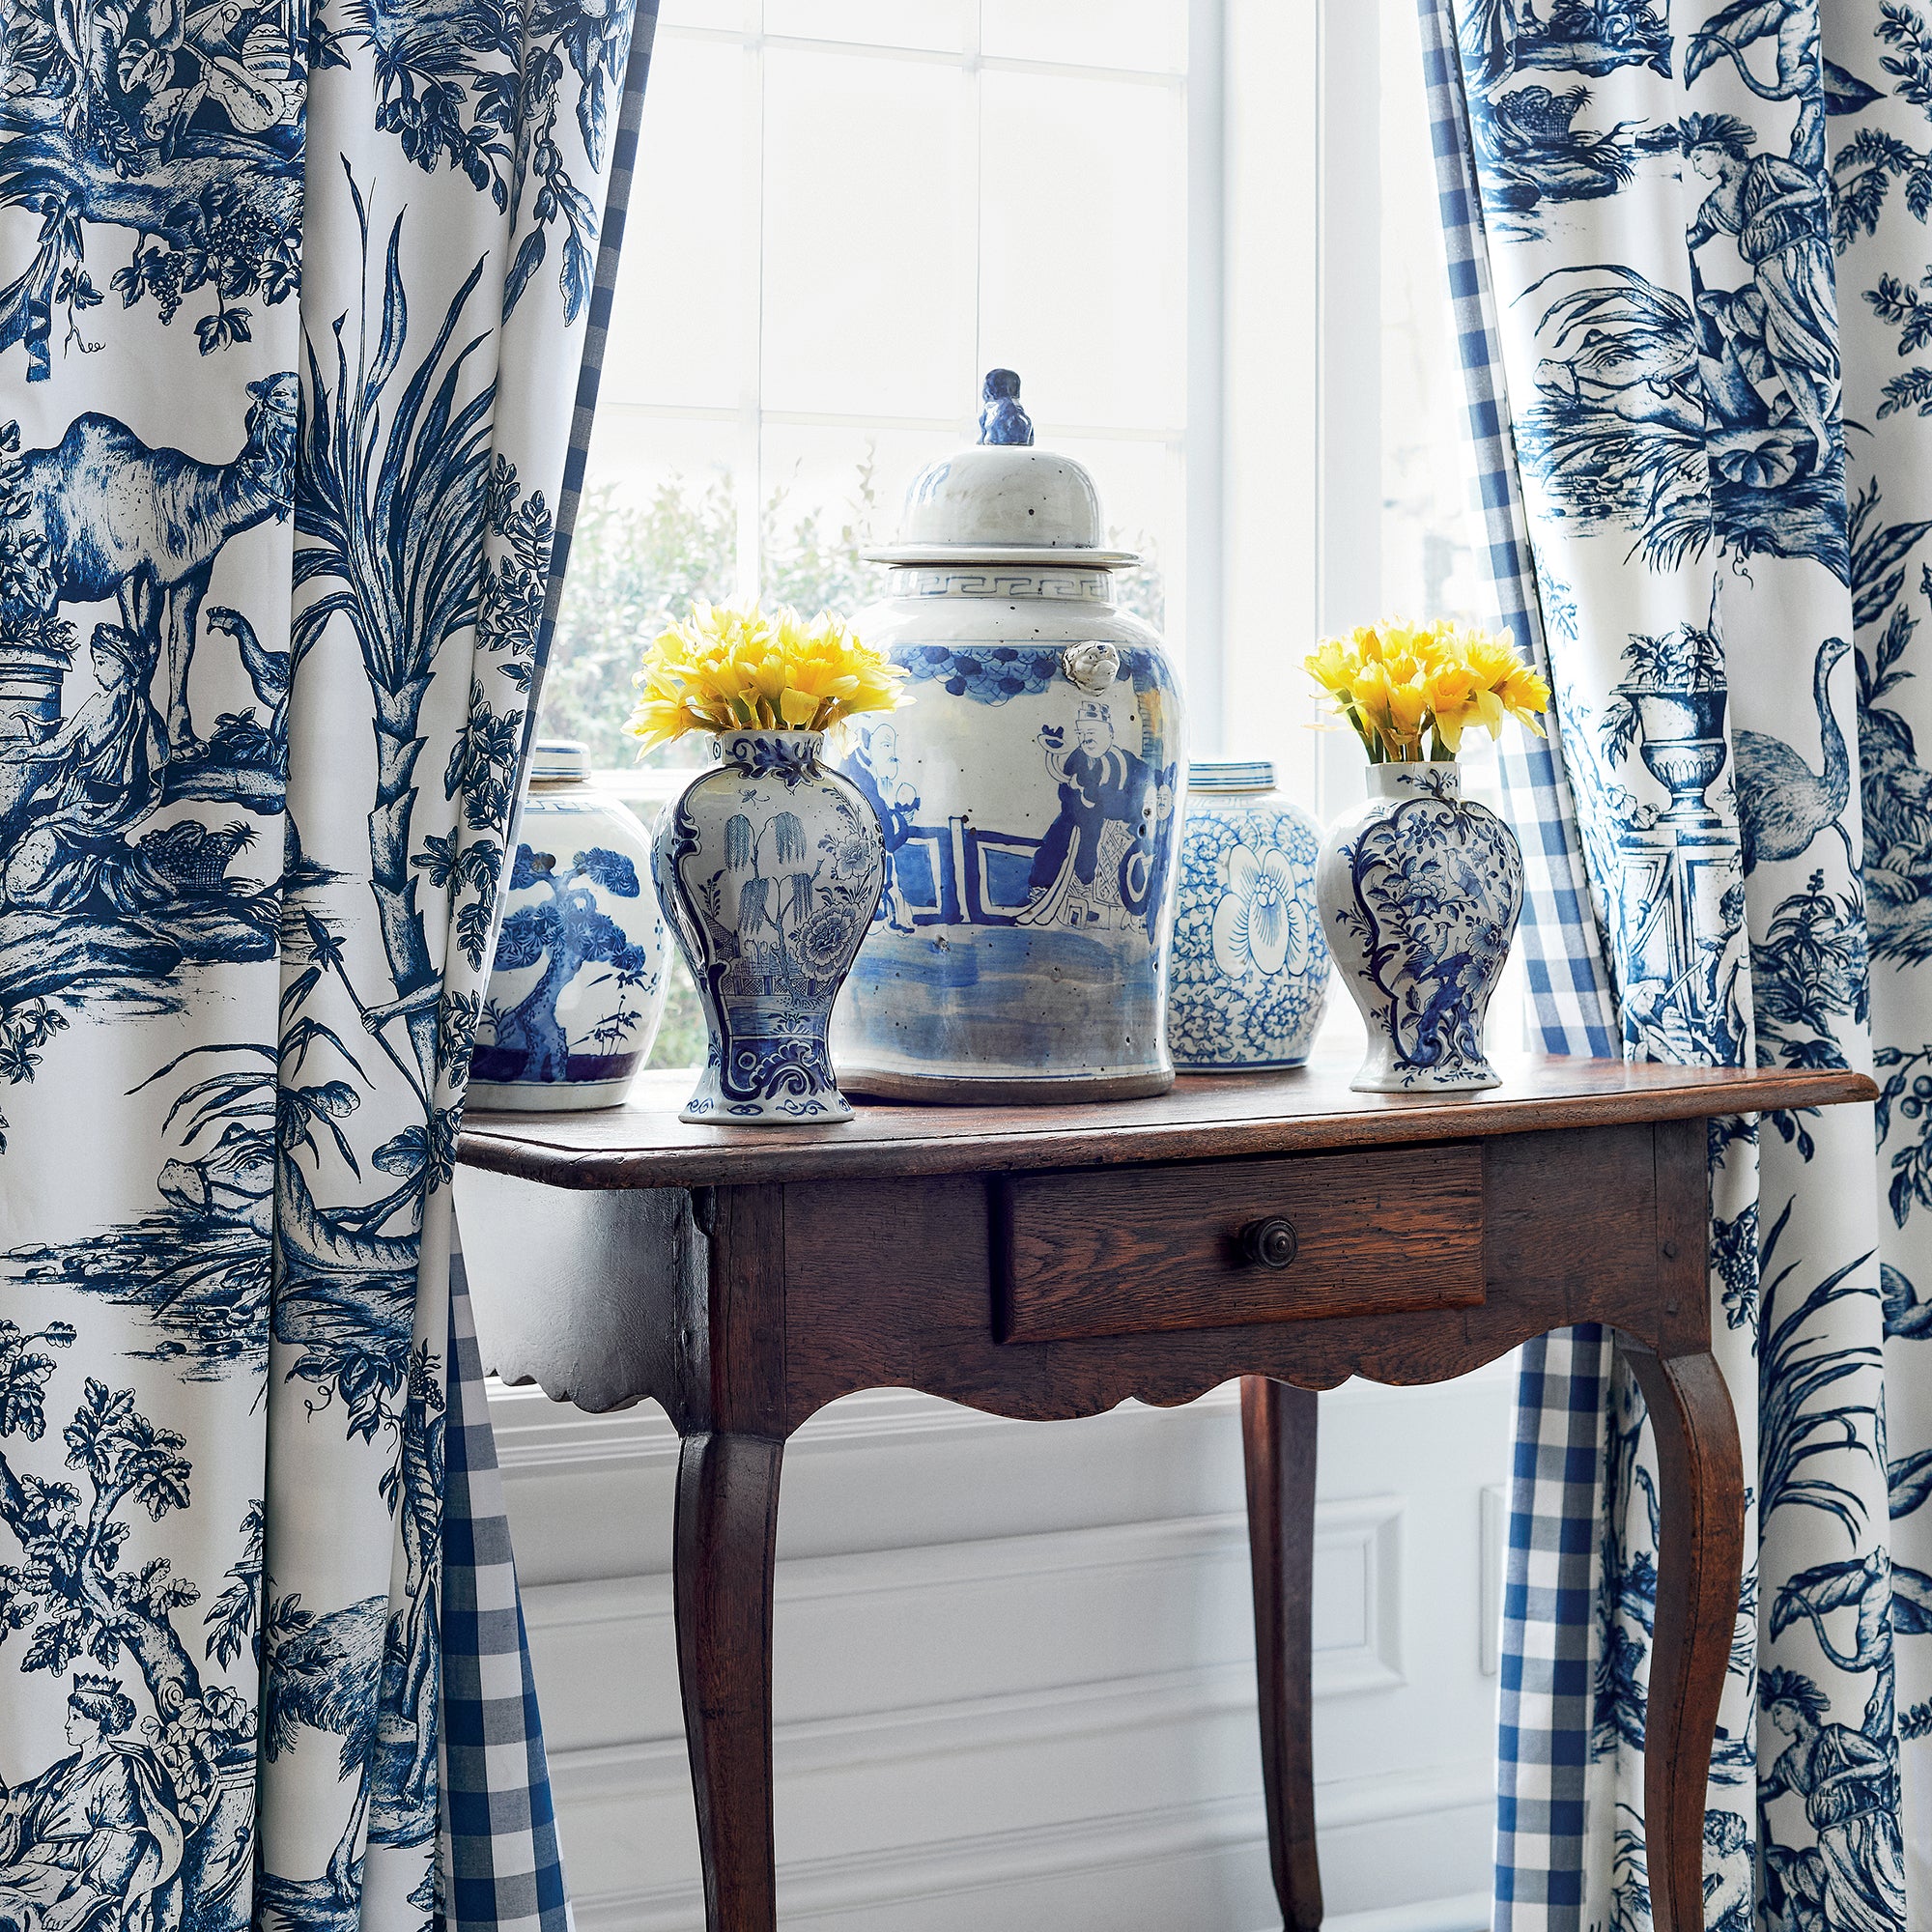 Drapery in Antilles Toile printed fabric in Navy - pattern number AF15171 - by Anna French in the Antilles collection